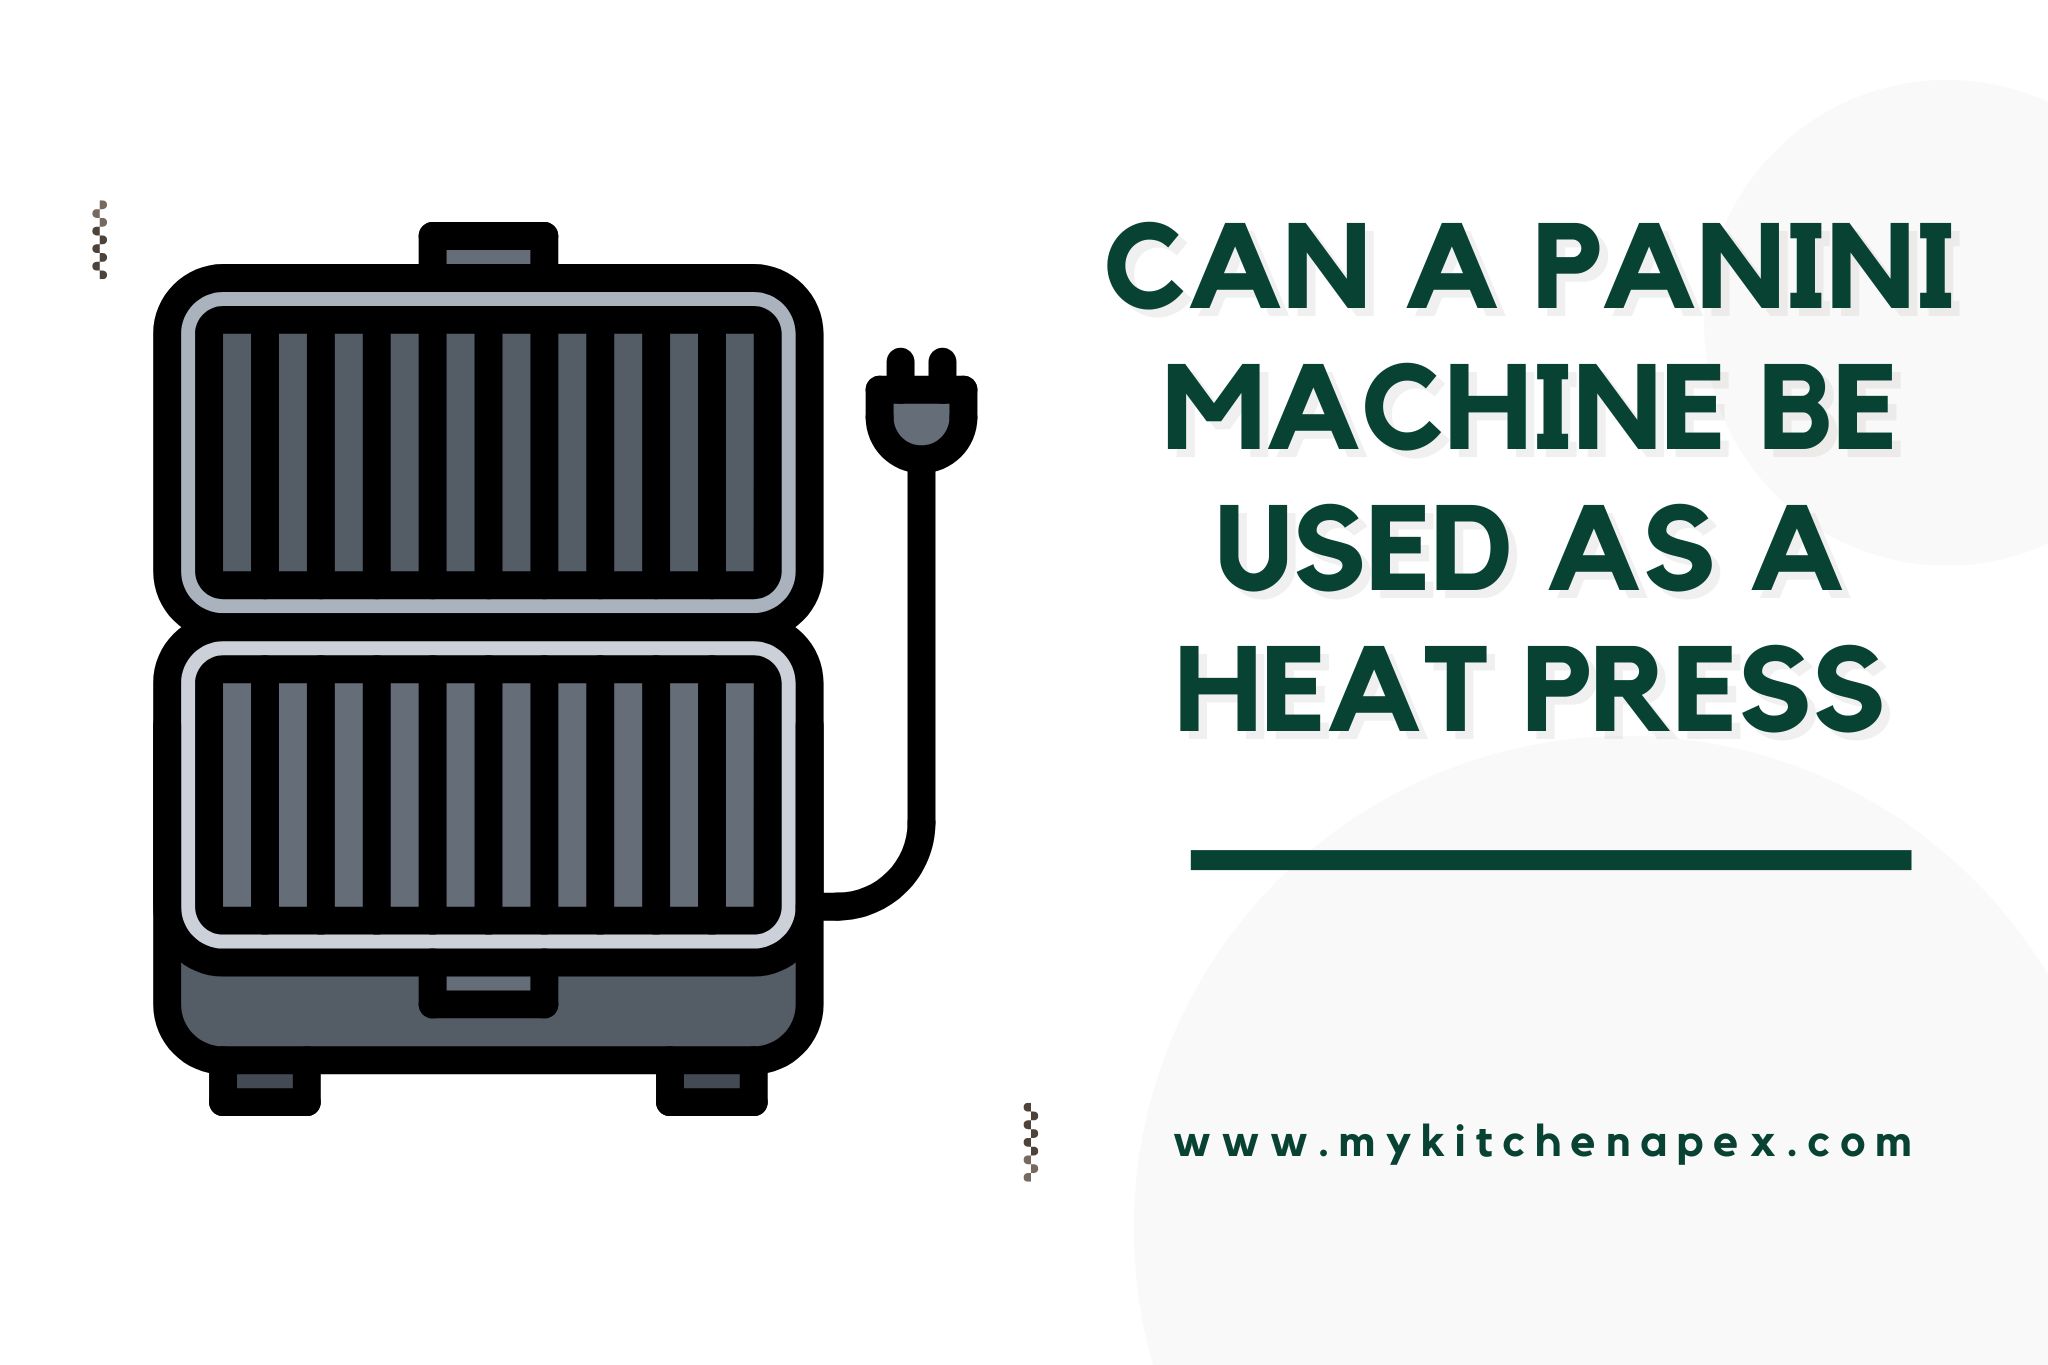 can a panini machine be used as a heat press